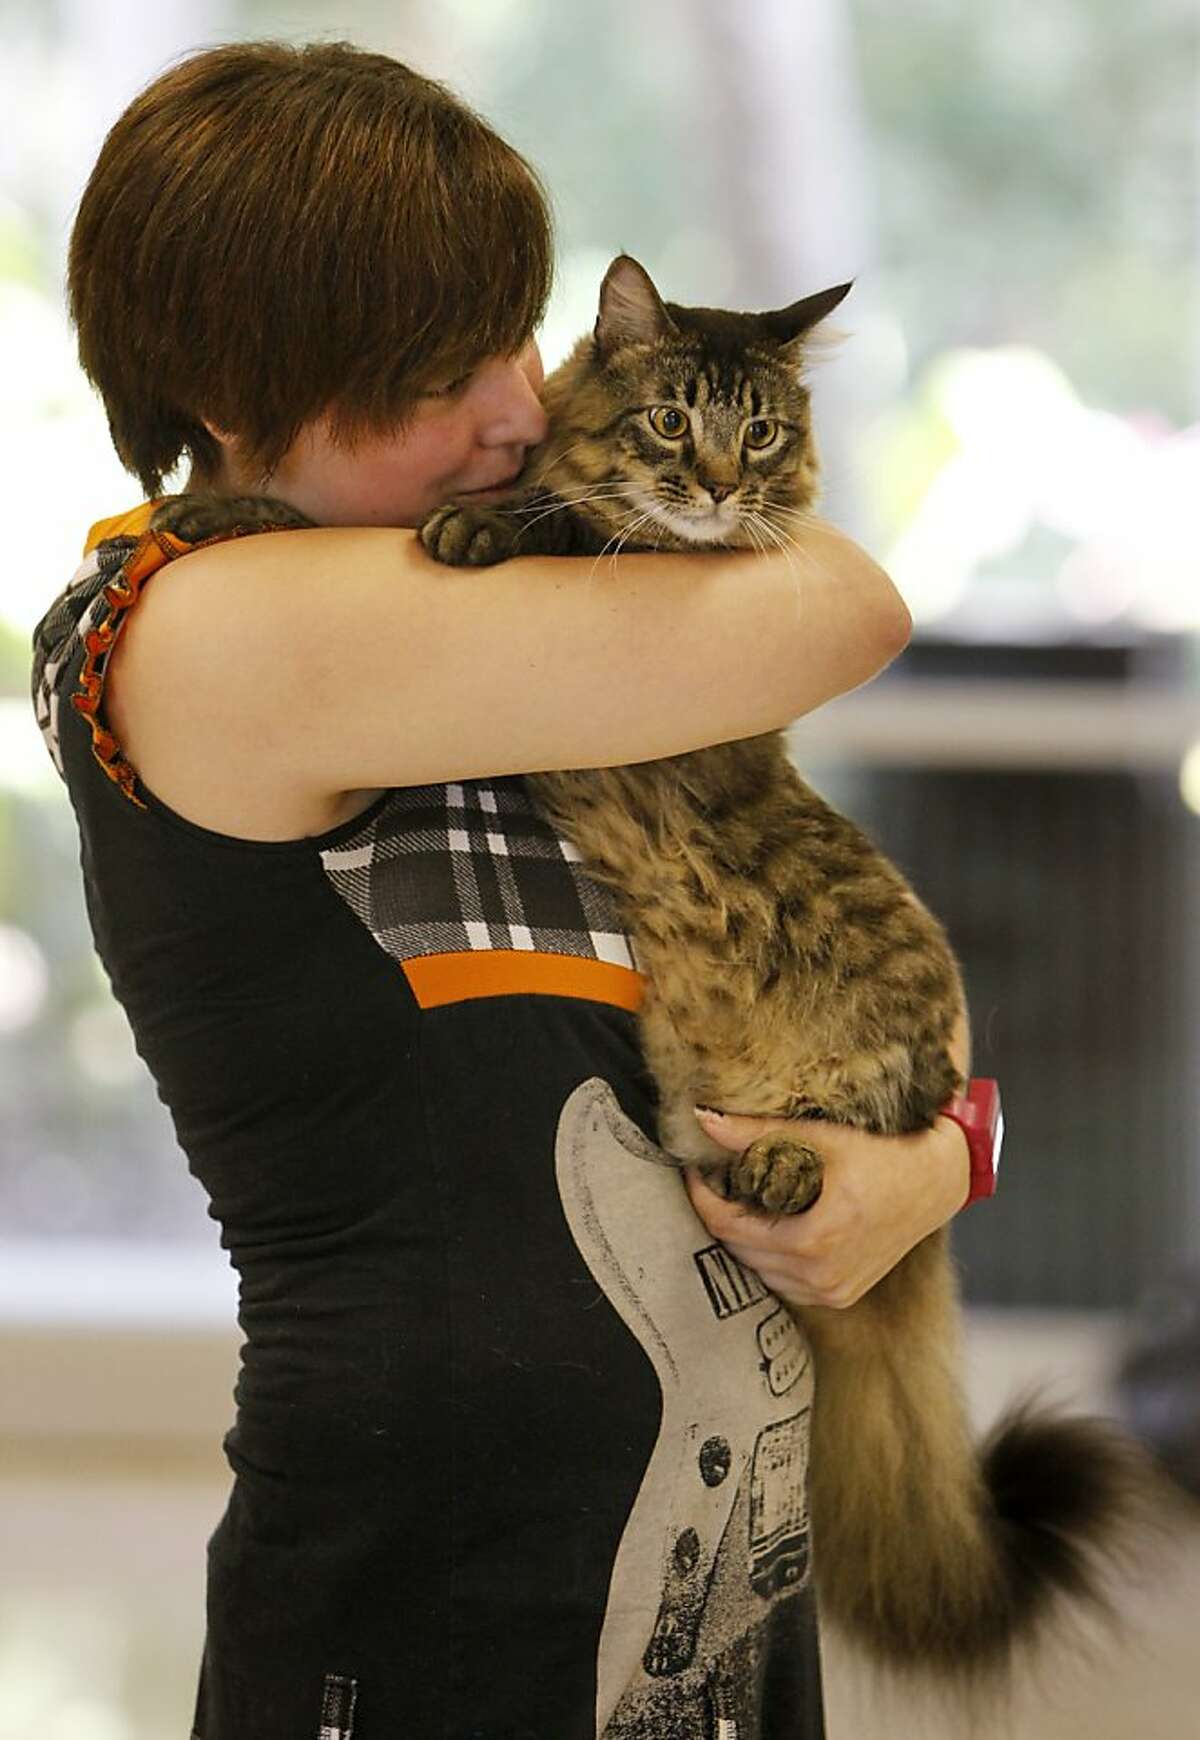 Big cat on campus: Junior Dana Schletter hugs Totoro after the Maine Coon got a clean bill of health at the Eckerd College pet Health Check in St. Petersburg, Fla. Eckerd allows students to have pets if they are registered and pass a health screening.